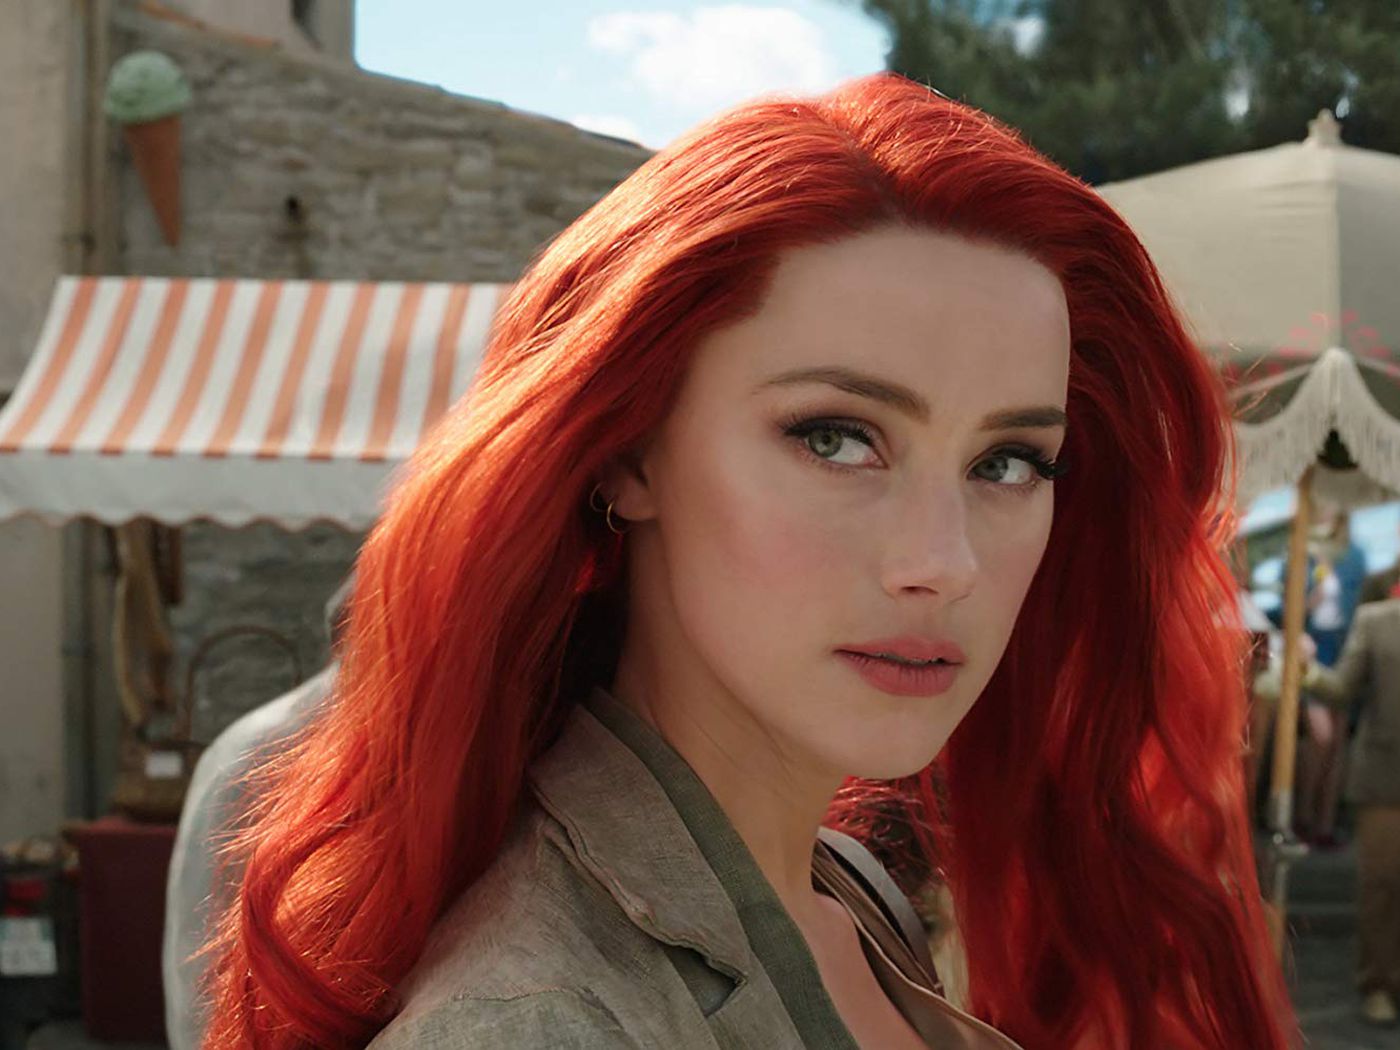 Aquaman Trailer: See Amber Heard and Her Giant Red Wig